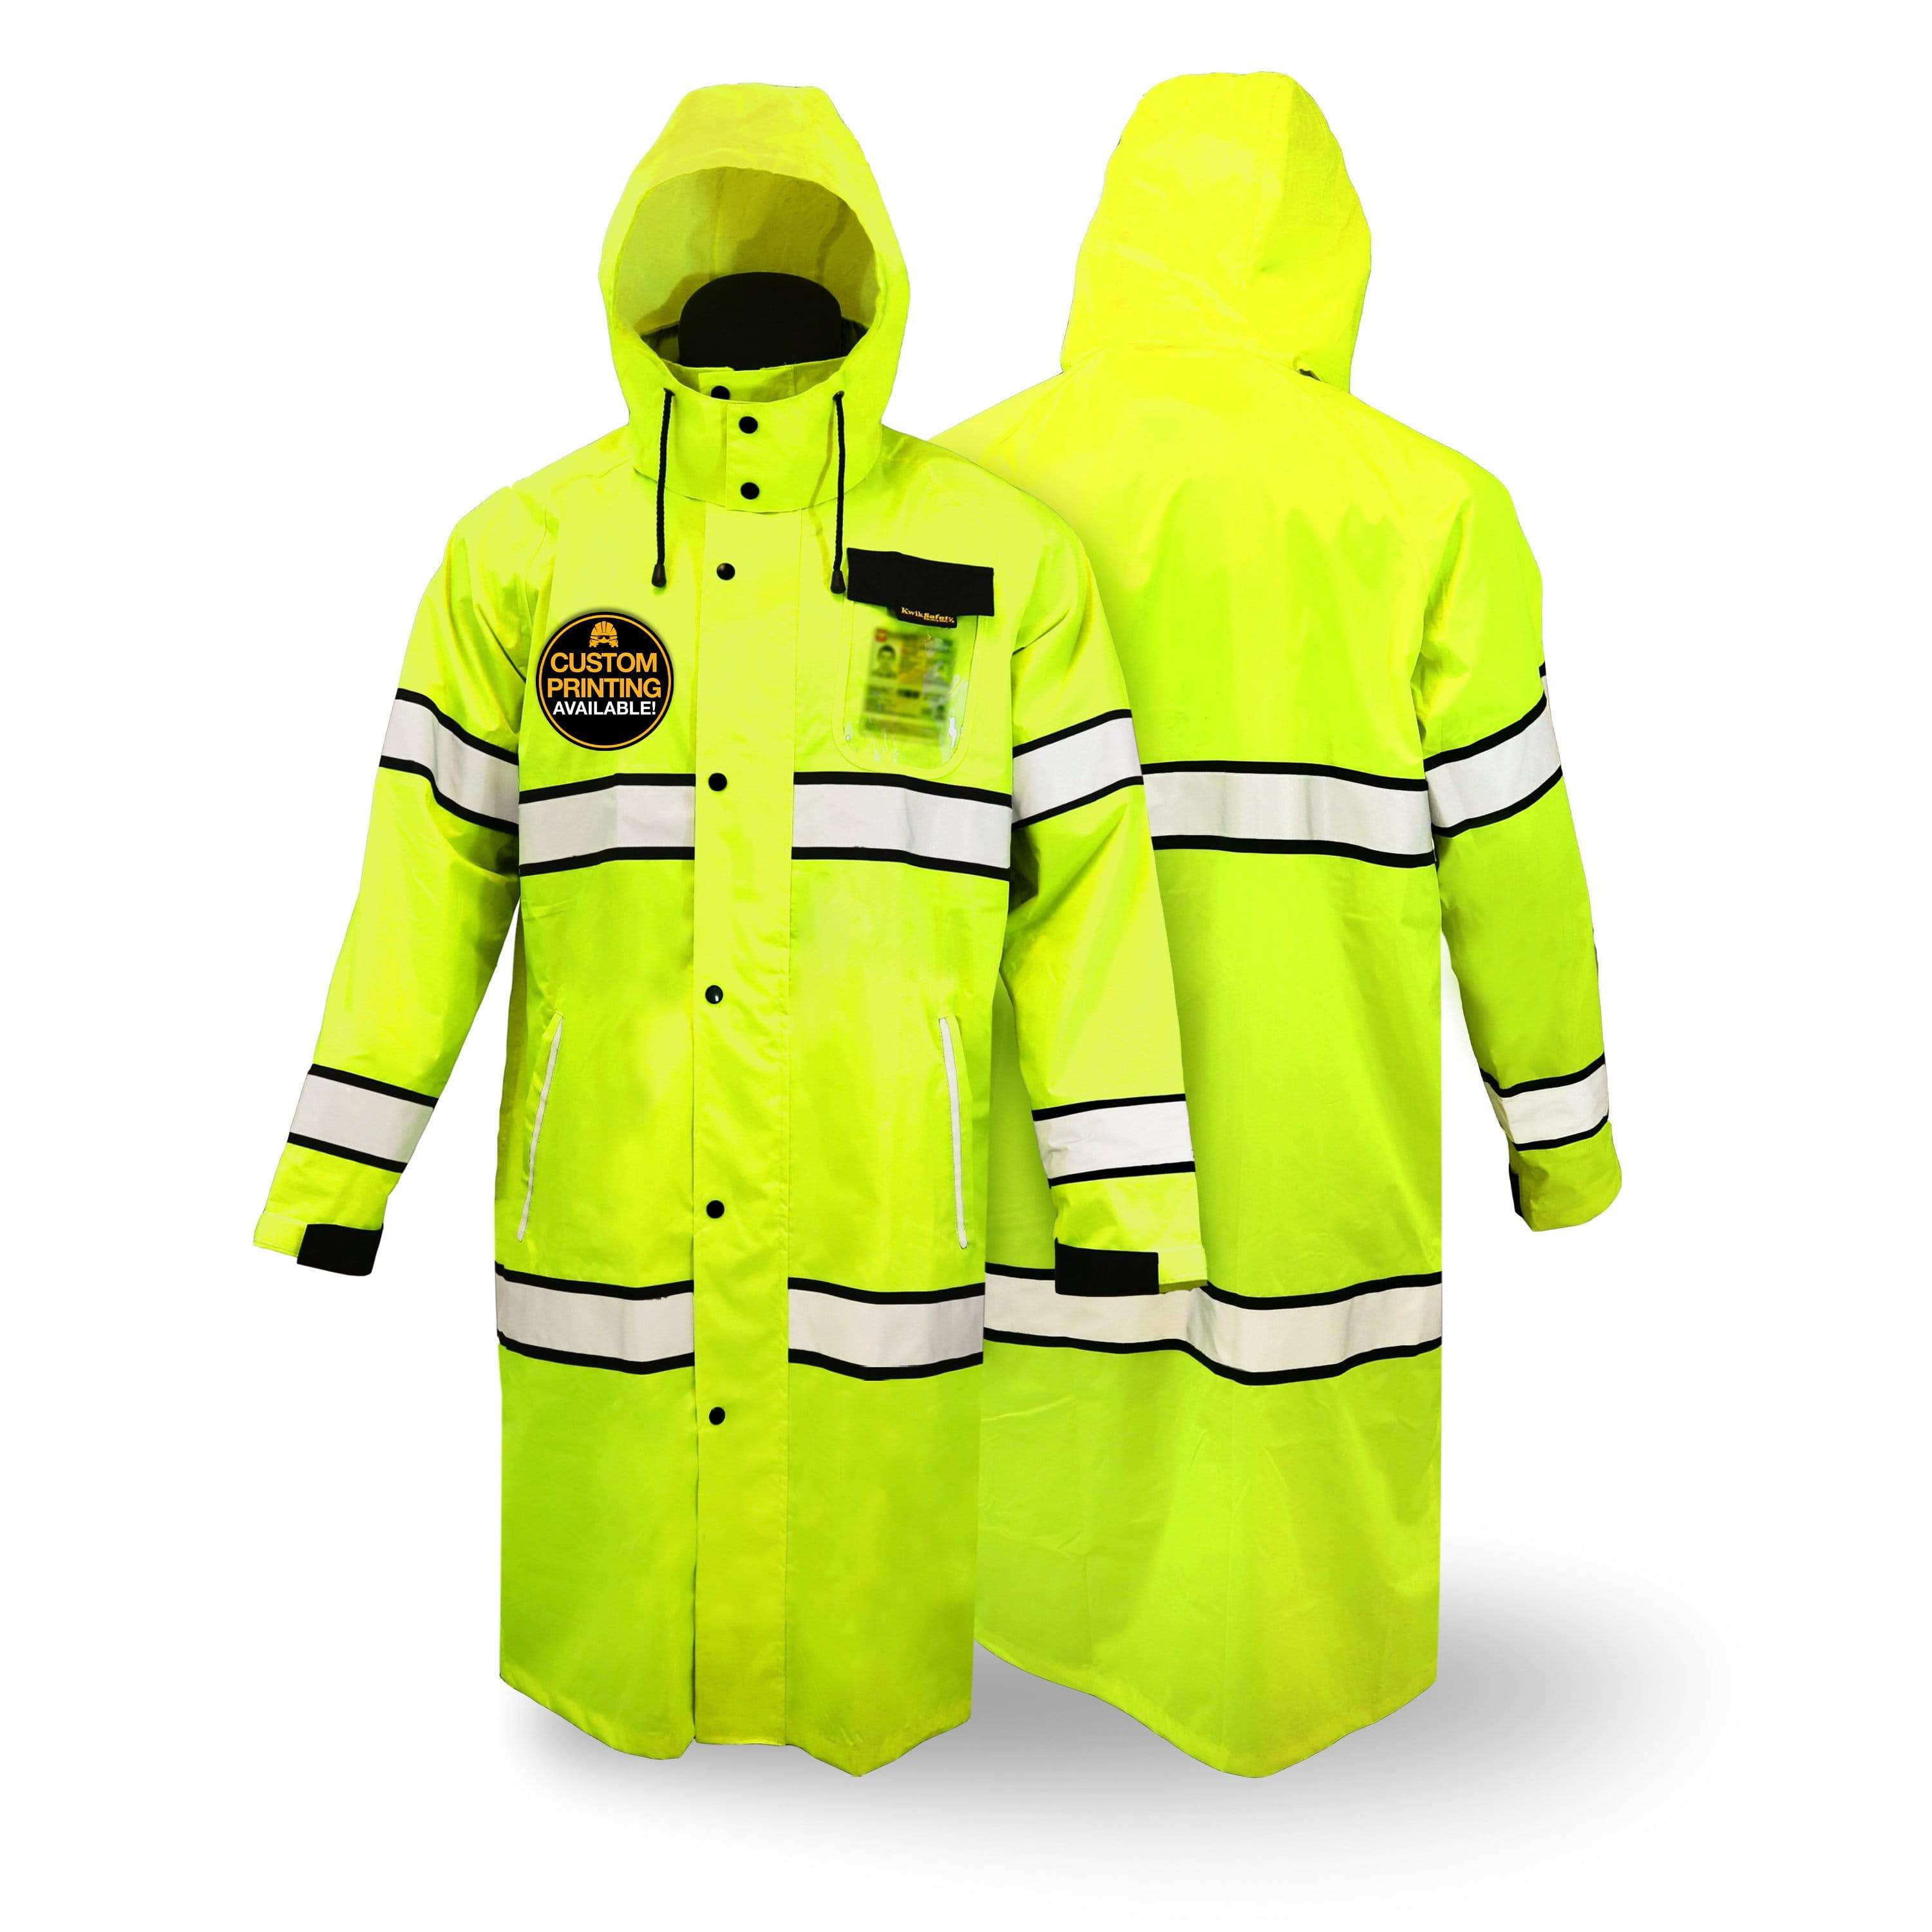 KwikSafety TORRENT High Visibility Rain Gear (FOLDABLE HOOD) Class 3, Type  R ANSI Tested OSHA Compliant Hi Vis Trench Coat Reflective PPE - Model No.:  